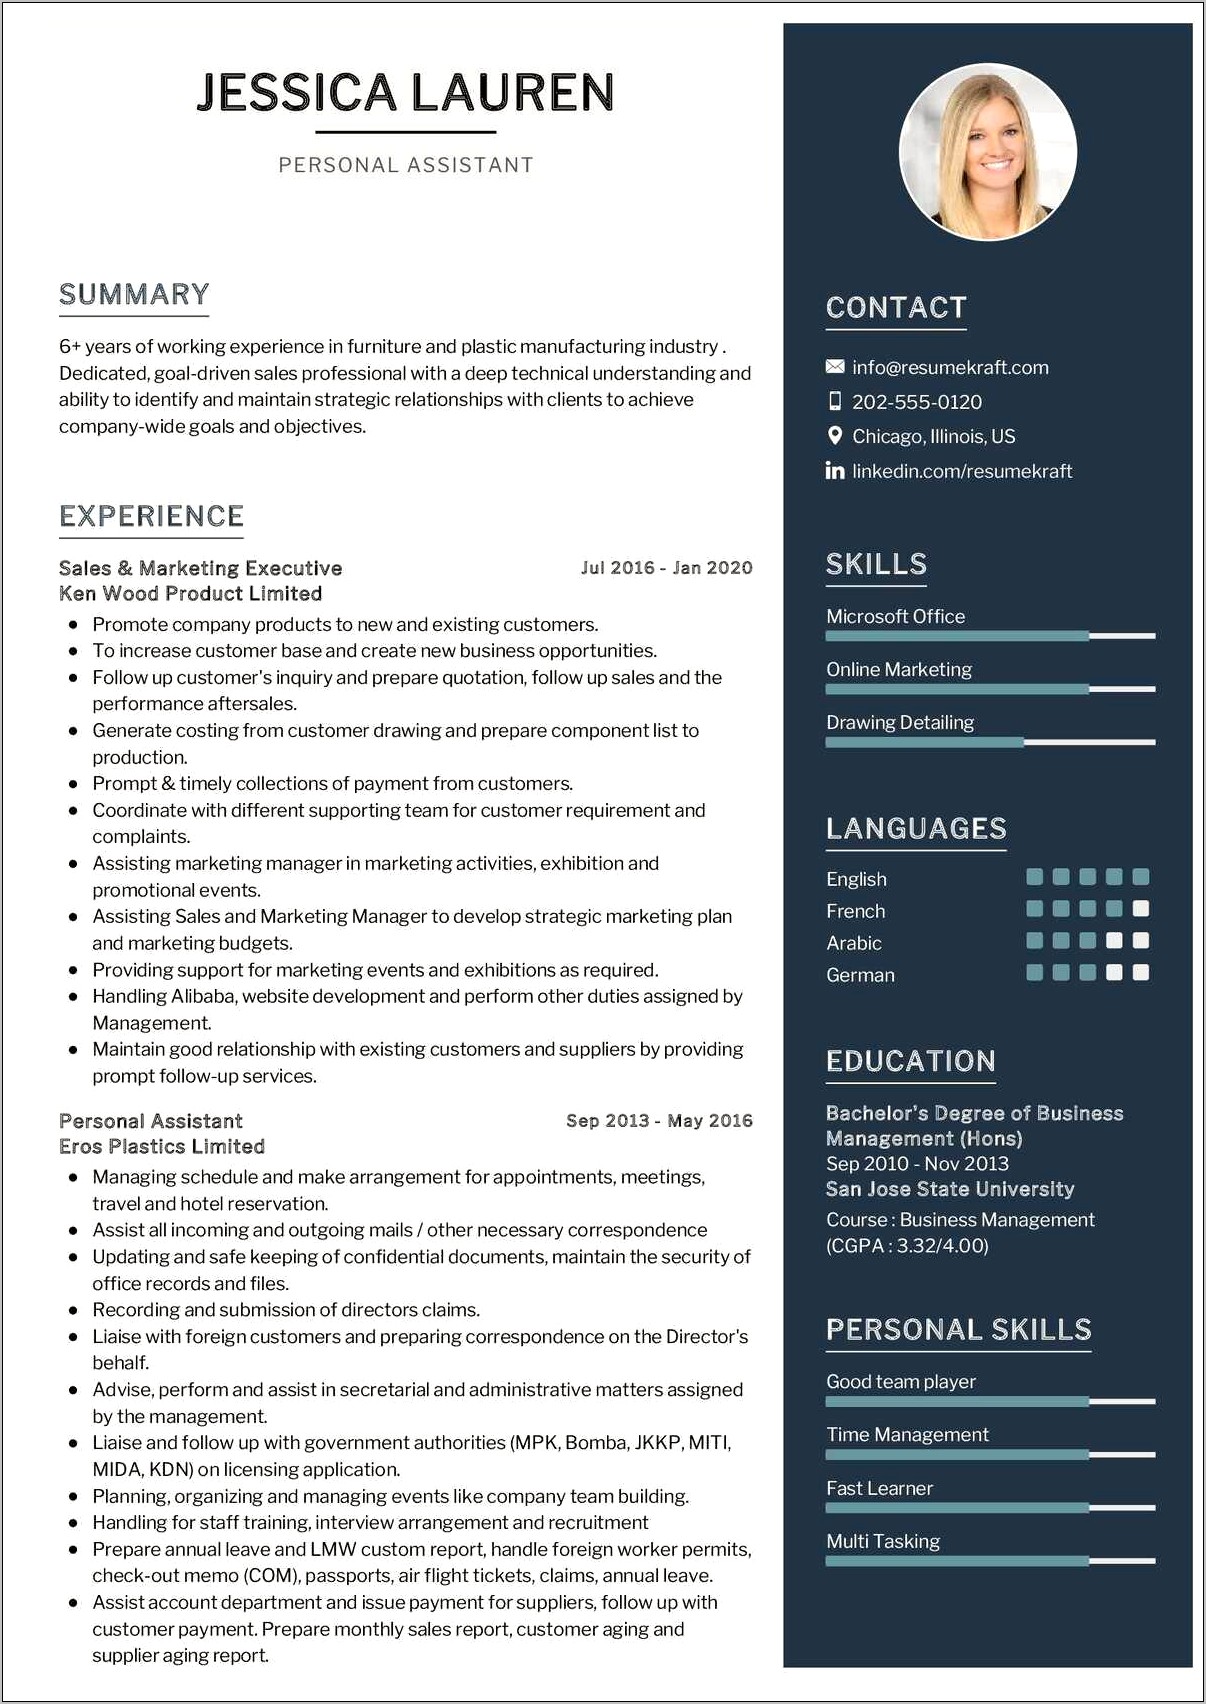 Home Personal Assistant Resume Sample